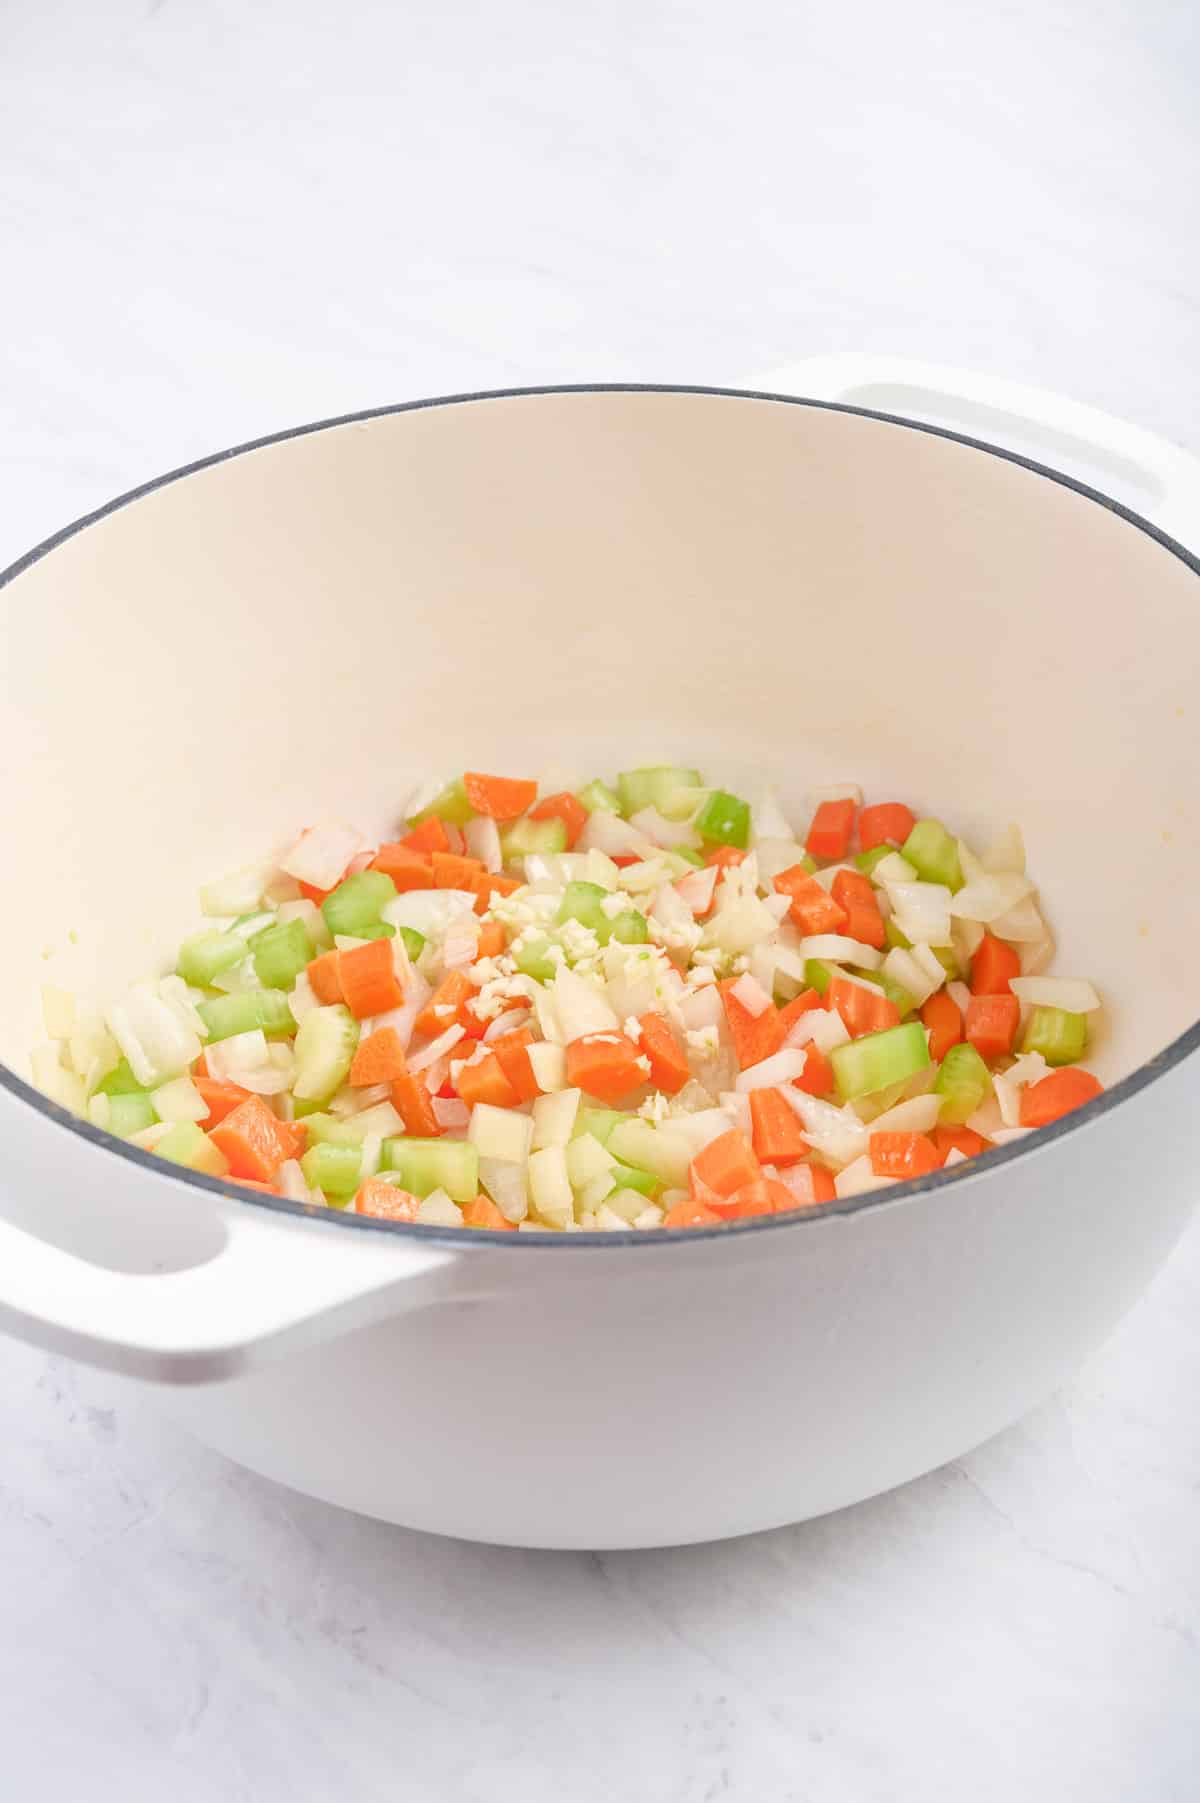 Saute mirepoix of onions, celery, and carrots as the base for the soup in a Dutch oven or pot.